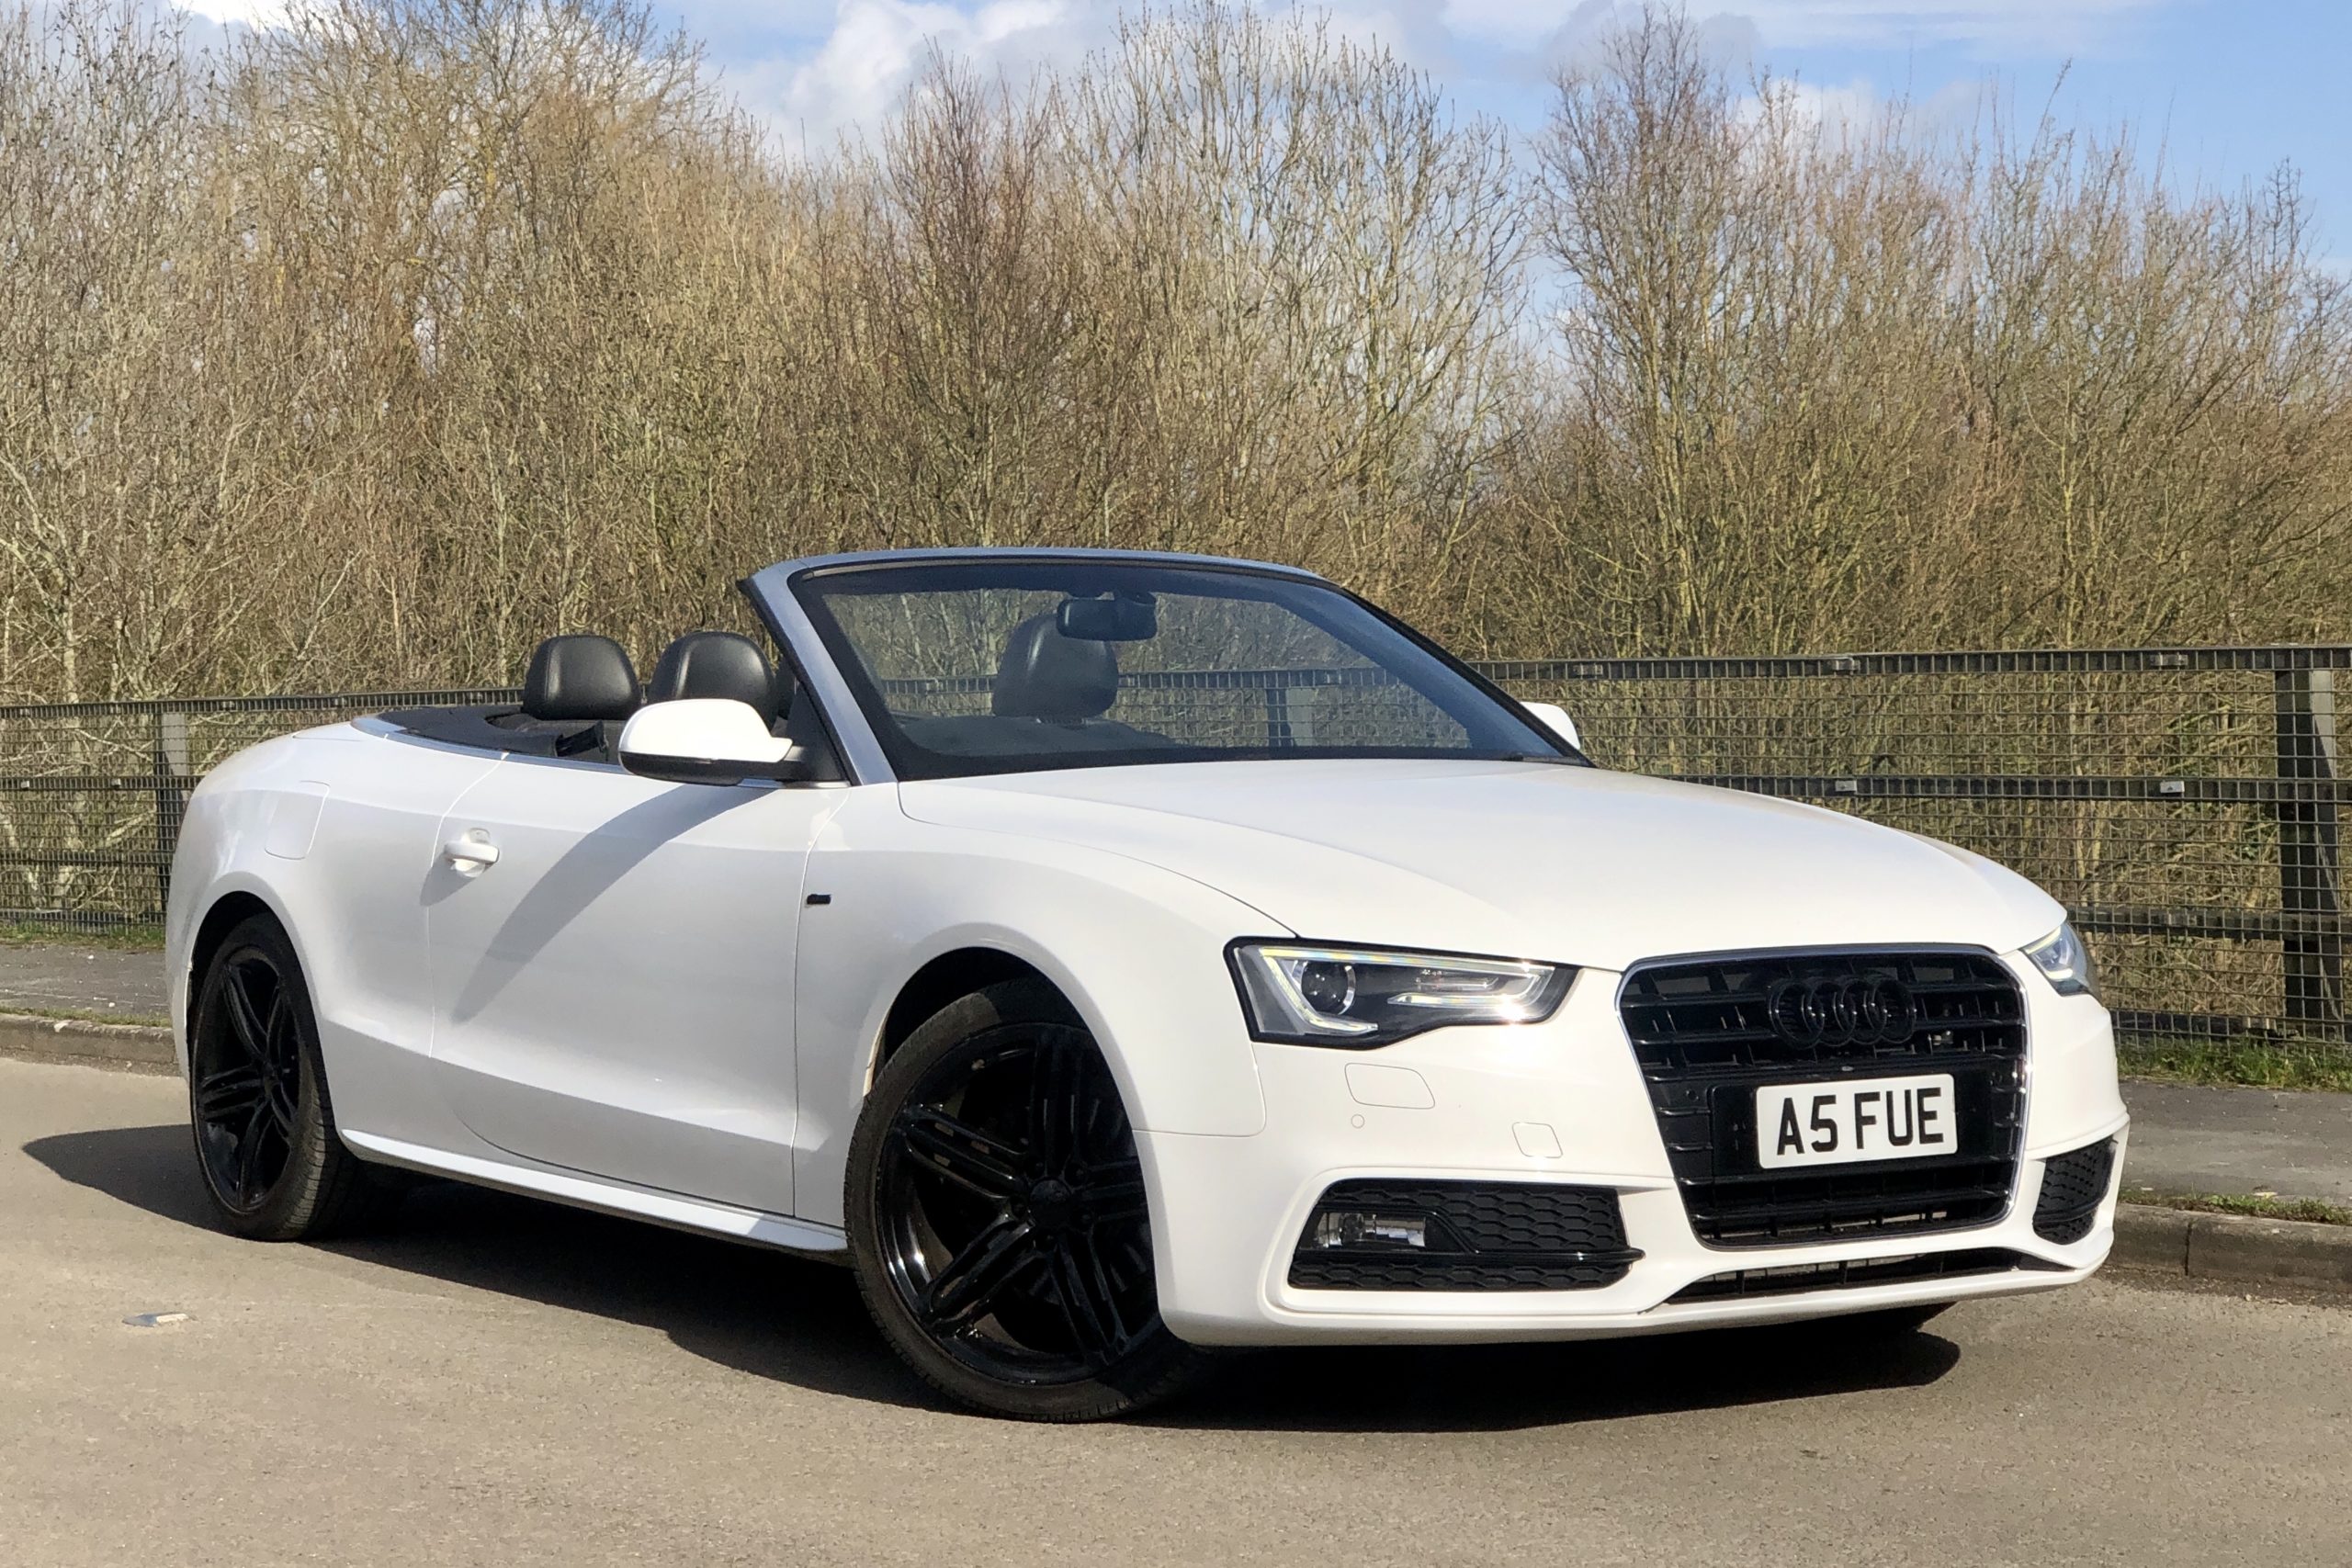 2013 Audi A5 Cabriolet 2.0 TDI S line Special Edition Cabriolet - Philip Raby Specialist Cars